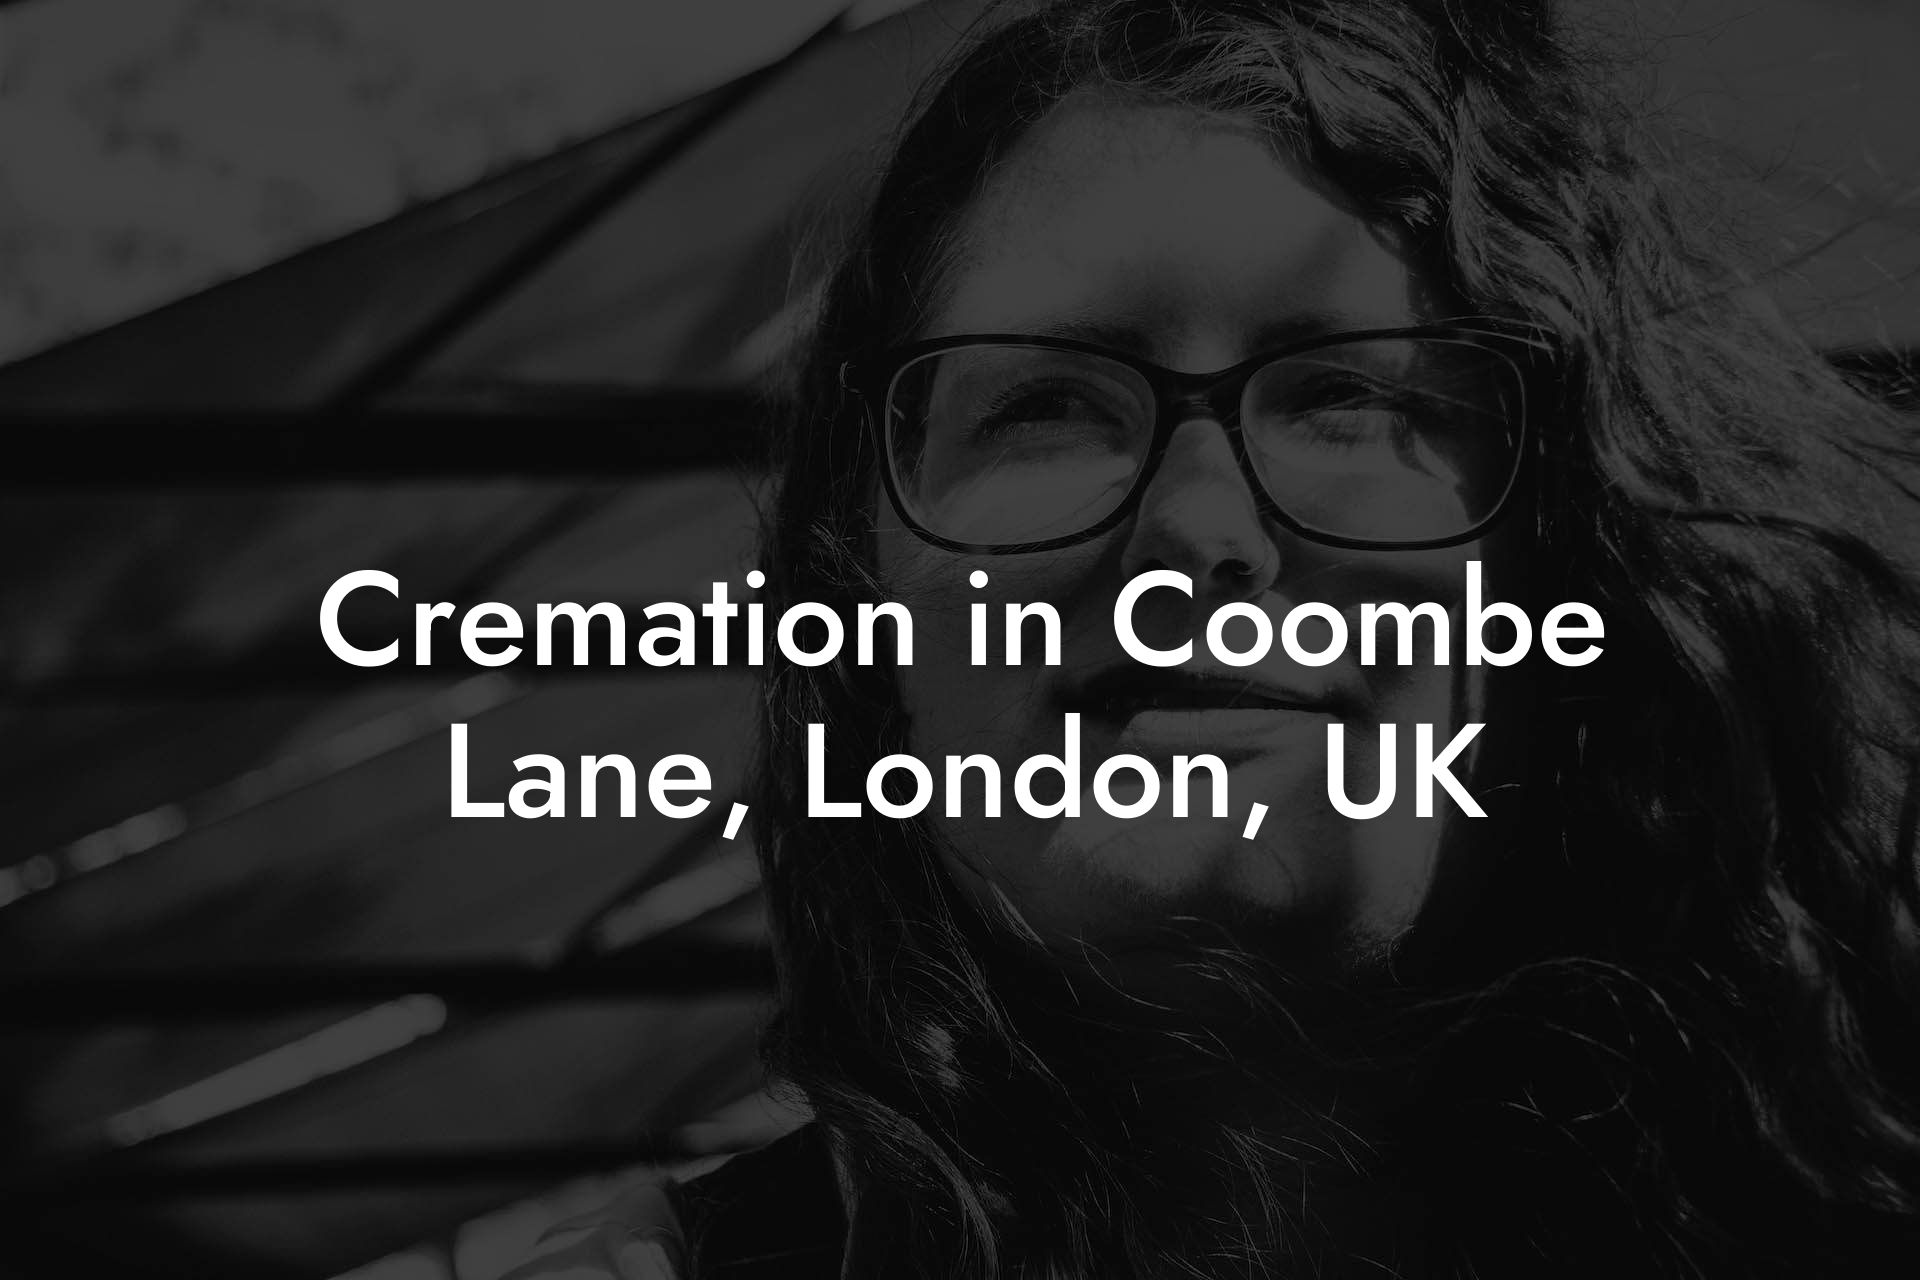 Cremation in Coombe Lane, London, UK